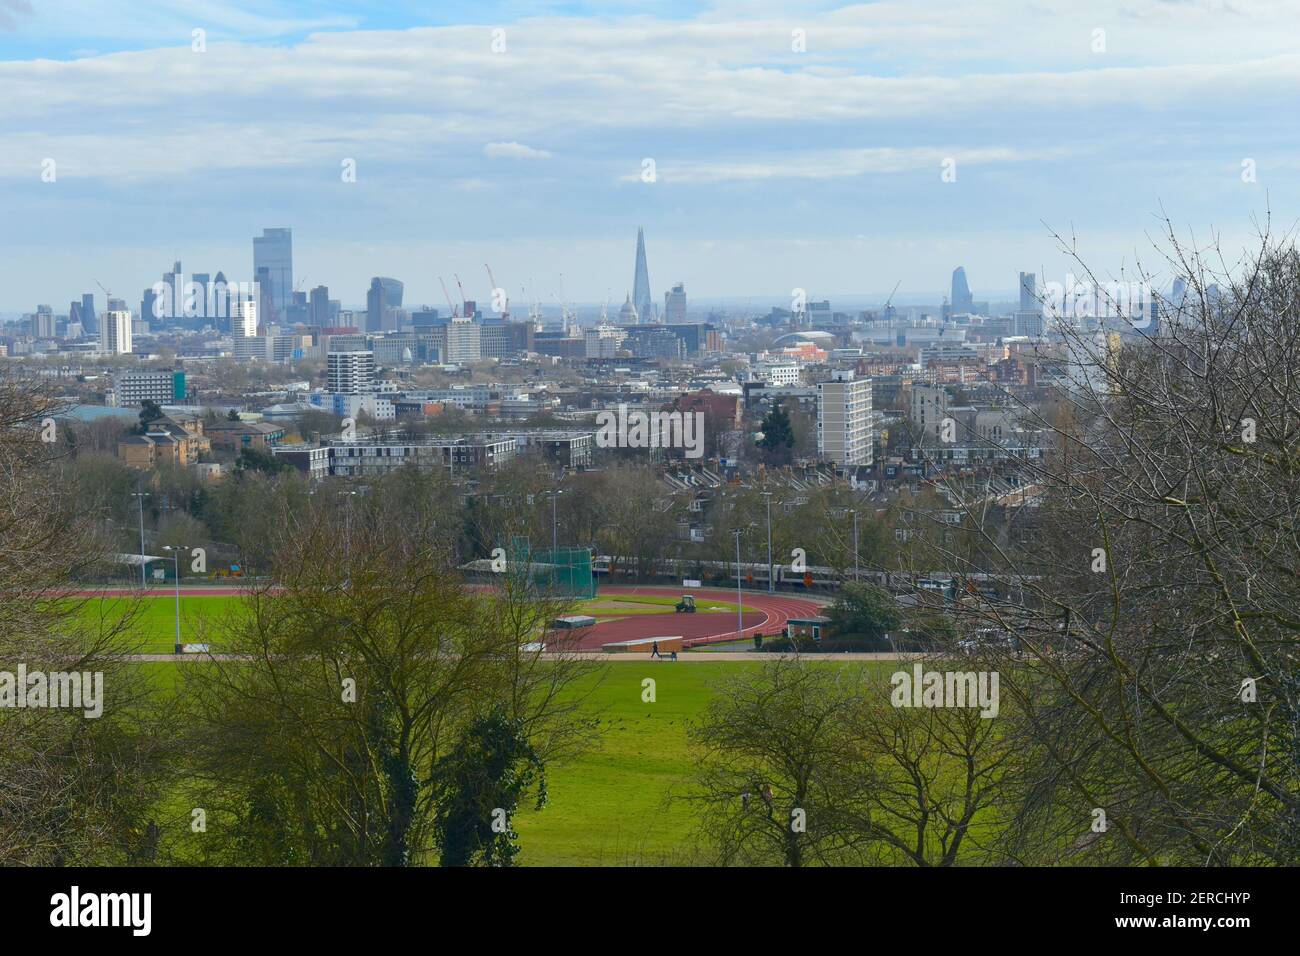 Parliament Hill formerly known as Traitor's Hill is the gateway to Hampstead Heath It is the highest point in the city at 98 metres with skyline views Stock Photo